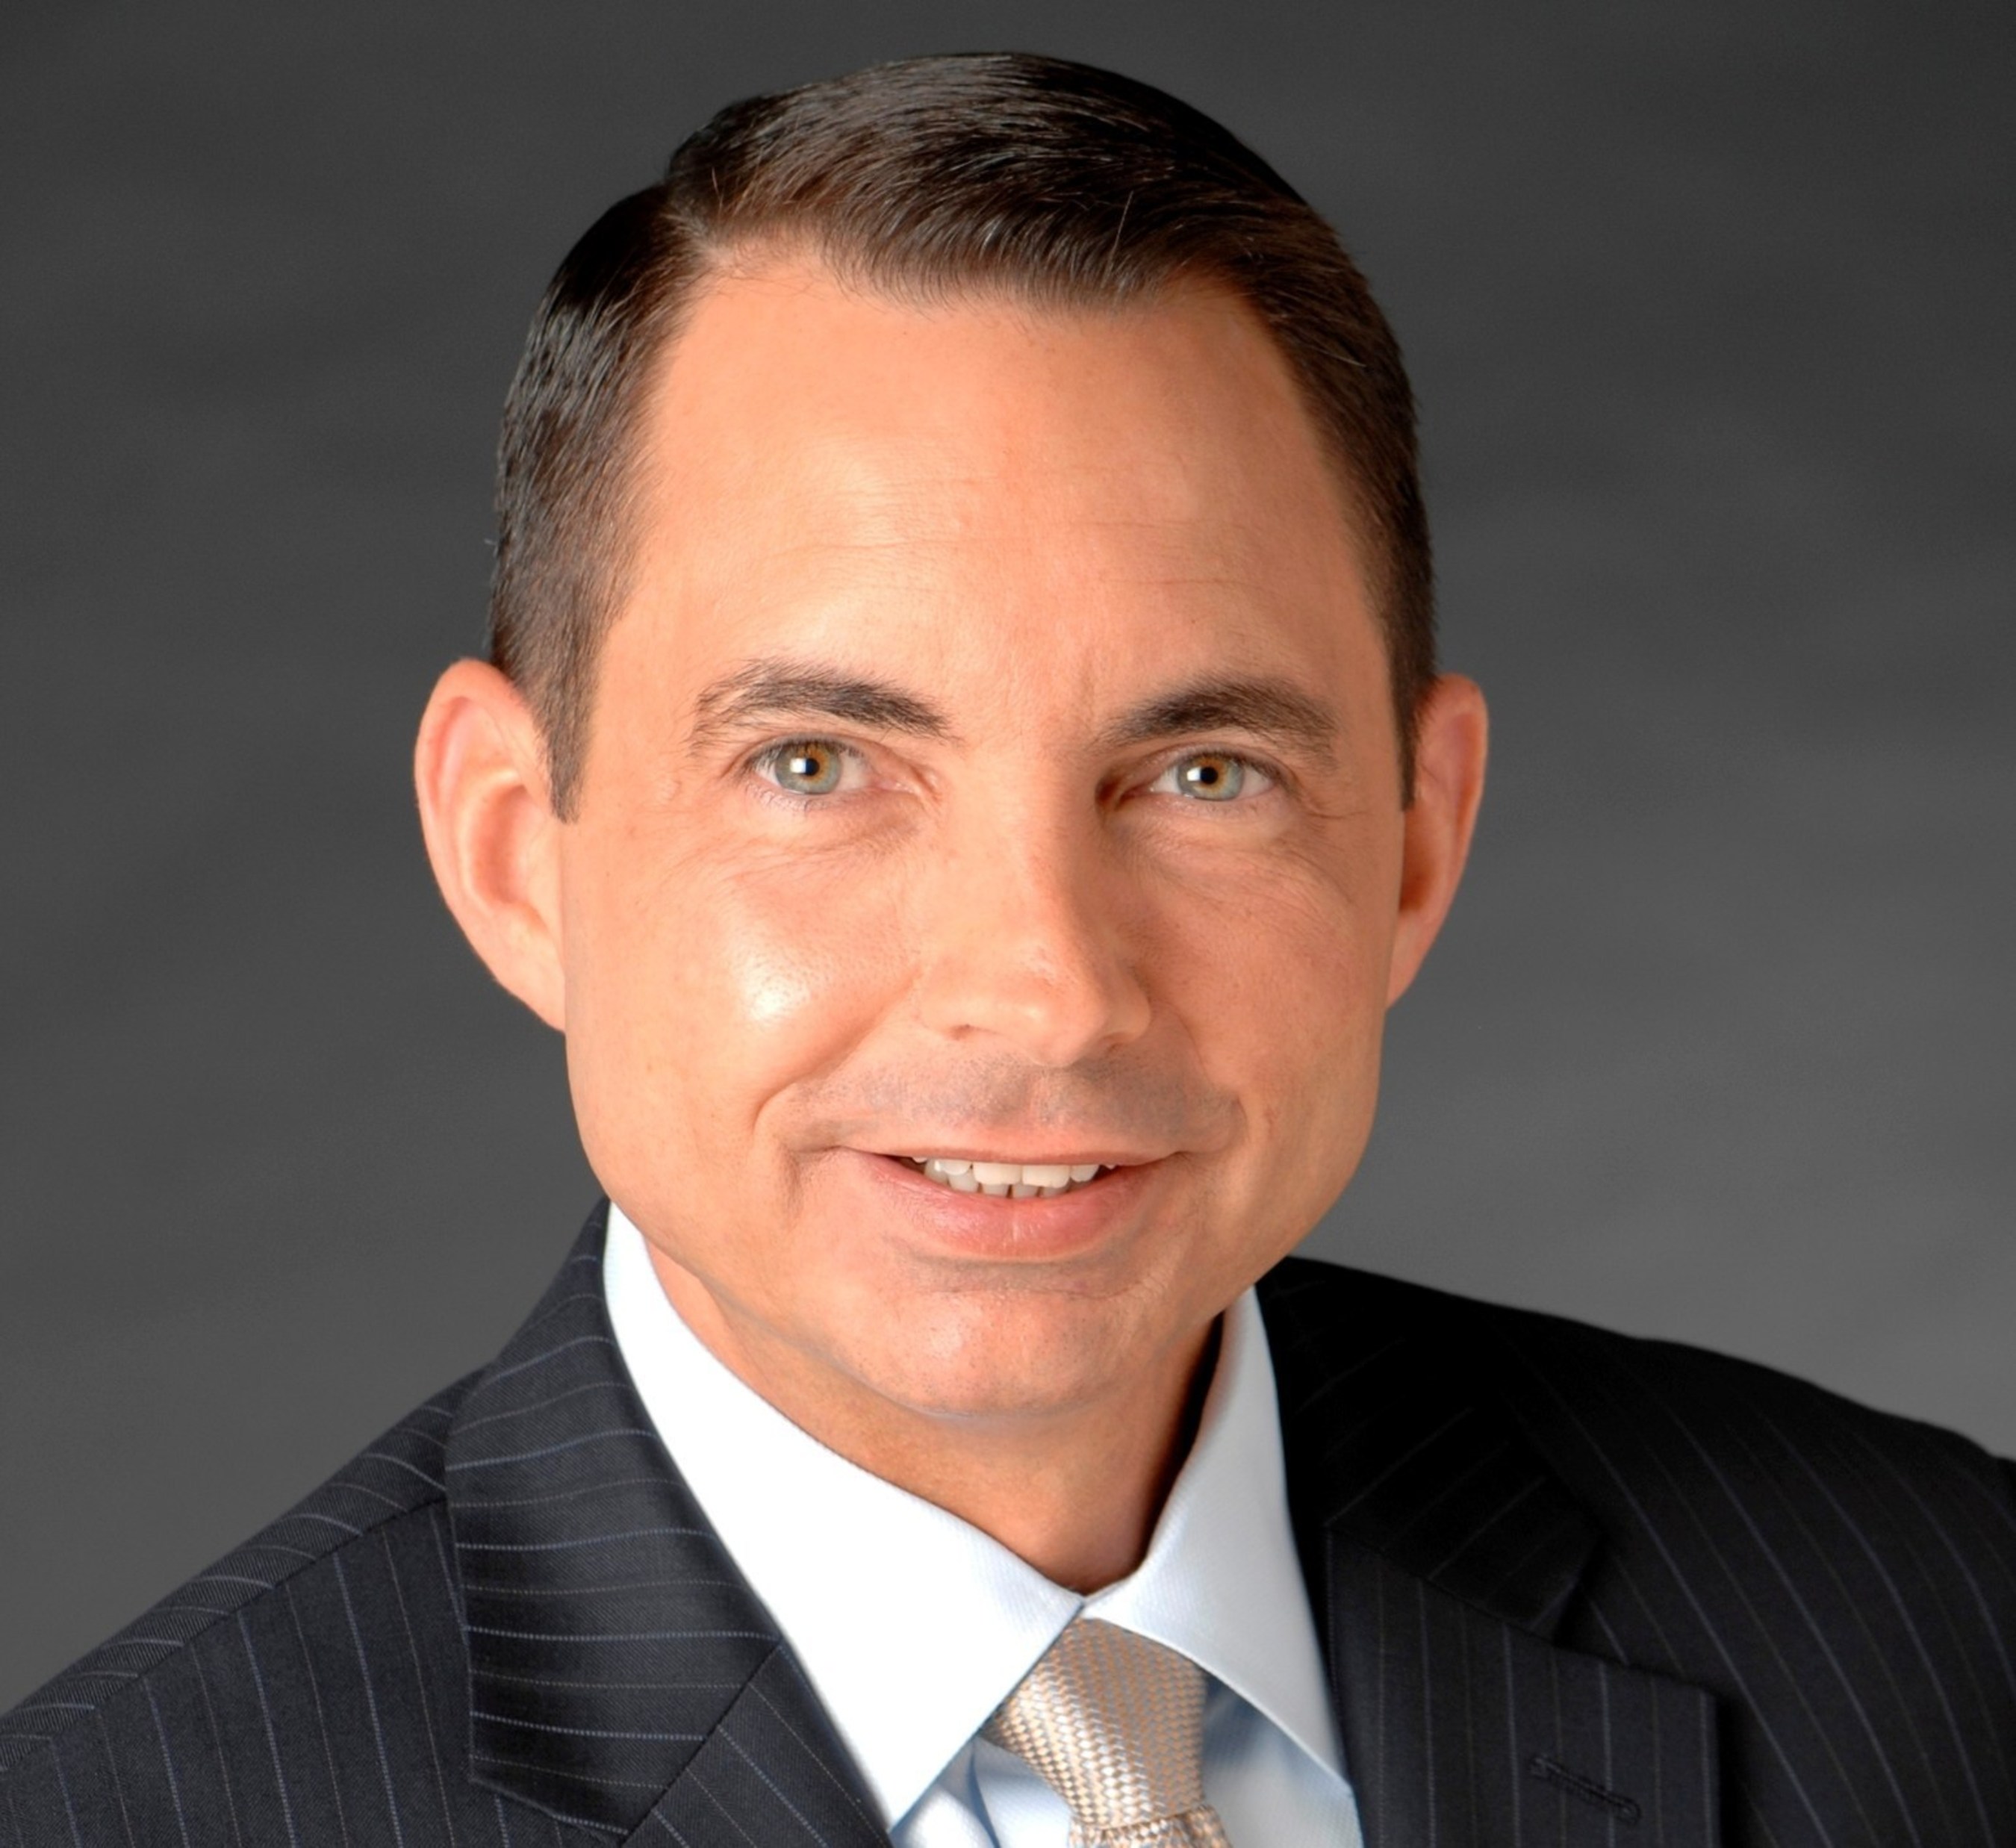 Paul J. Gennaro has joined Voya Financial, Inc. as senior vice president, Corporate Communications, and chief communications officer, effective January 12, 2015.